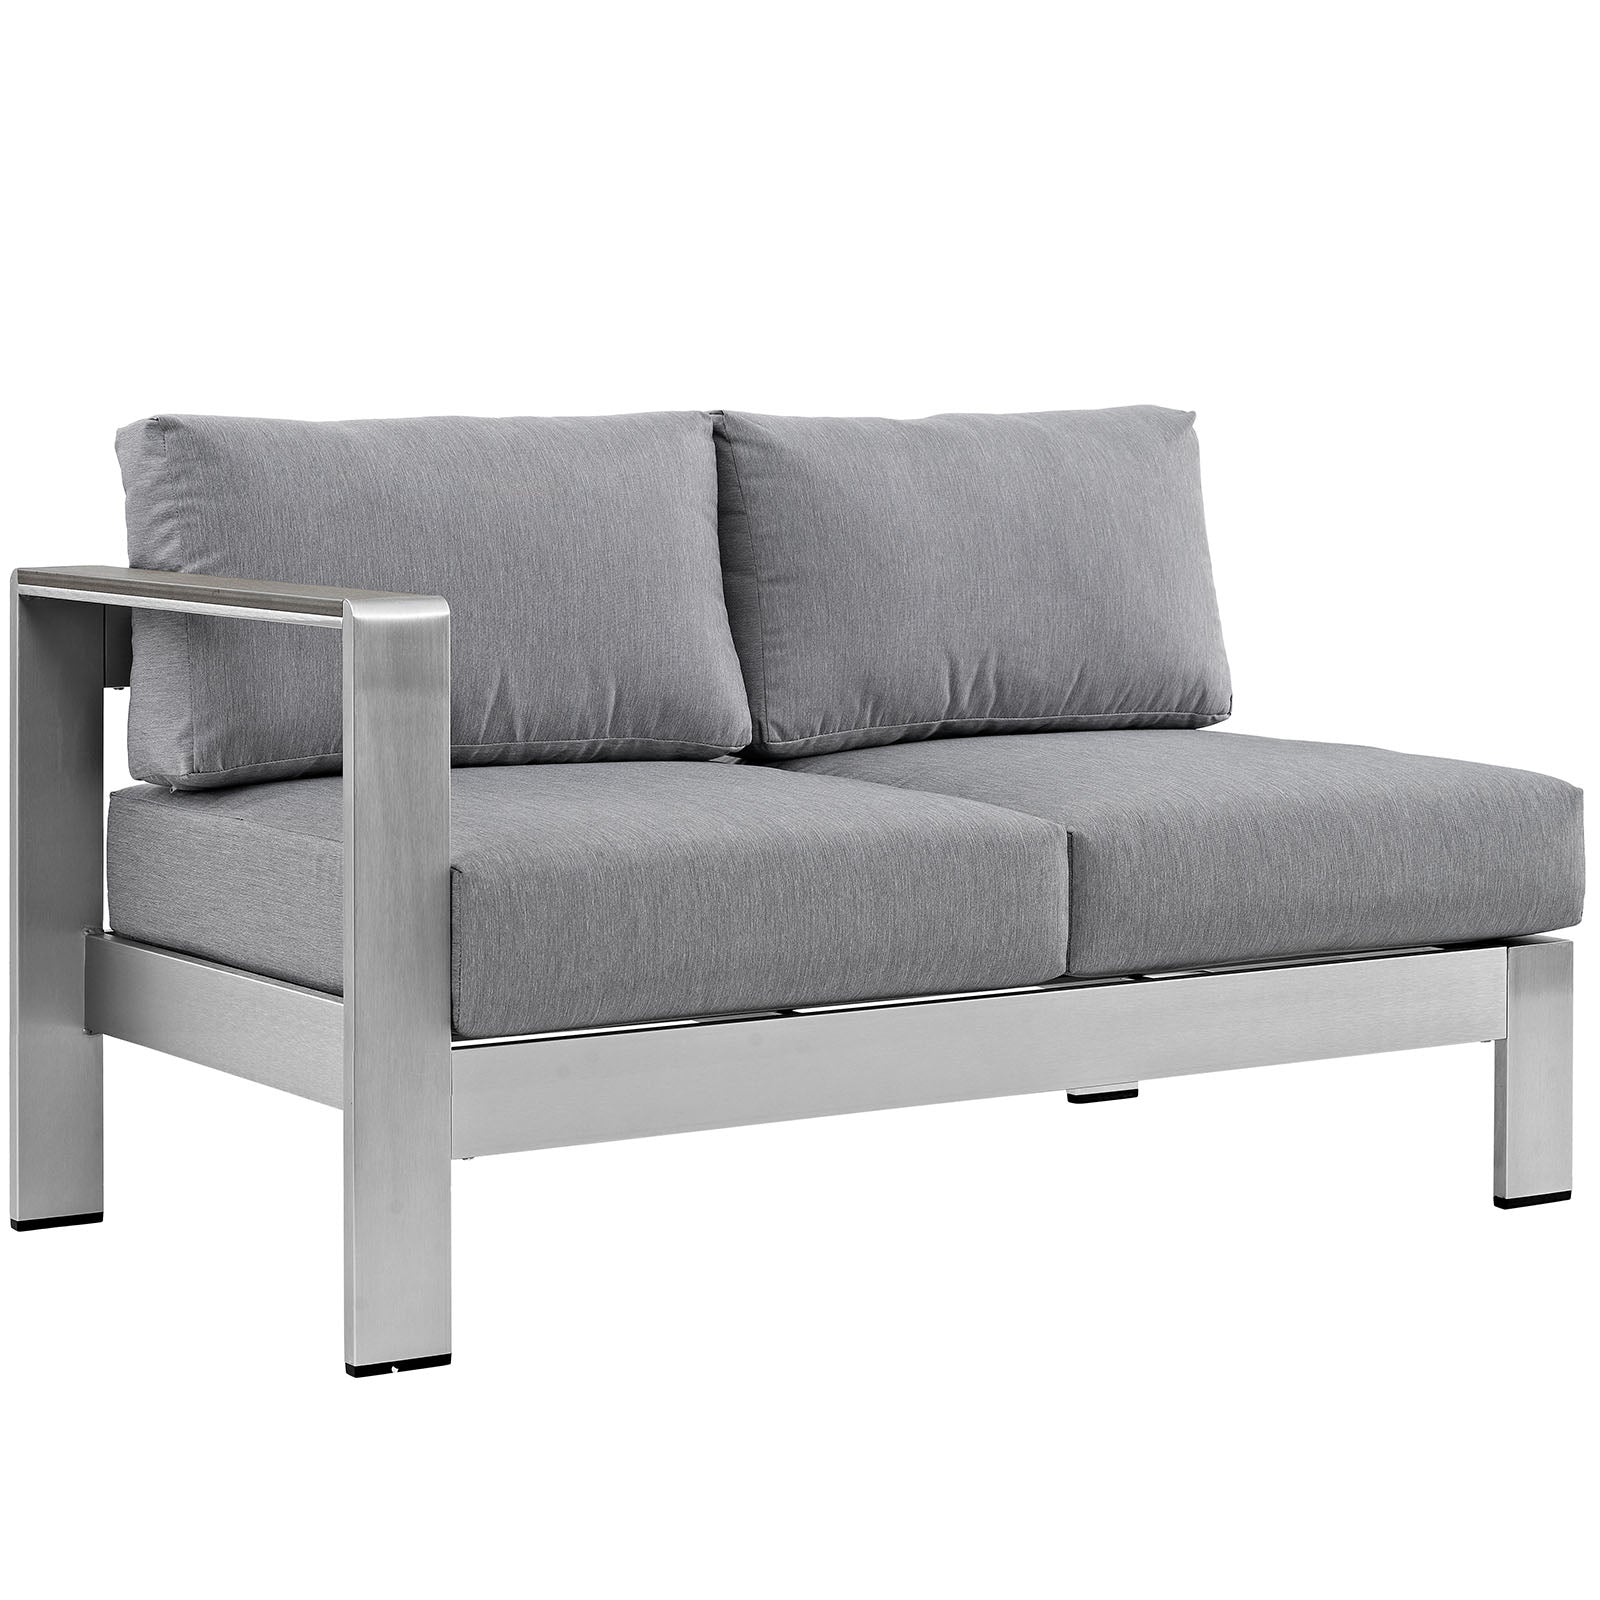 Modway Outdoor Sofas - Shore Left-Arm Corner Sectional Outdoor Loveseat Gray & Silver